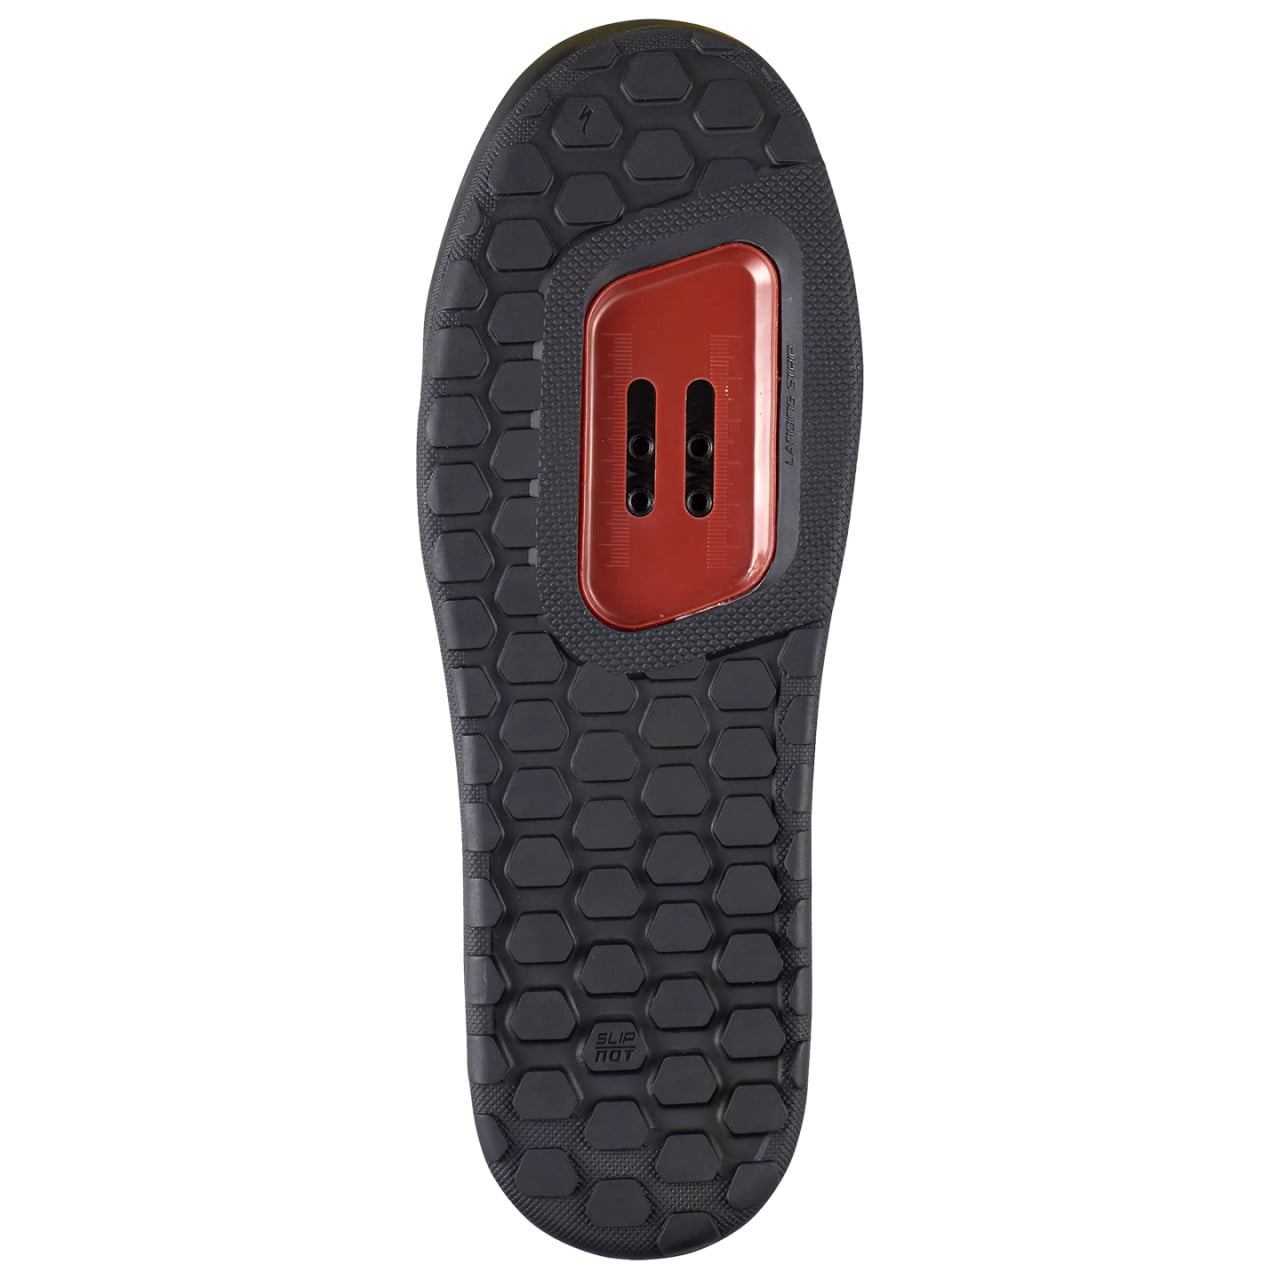 2FO Roost Clip MTB Shoes